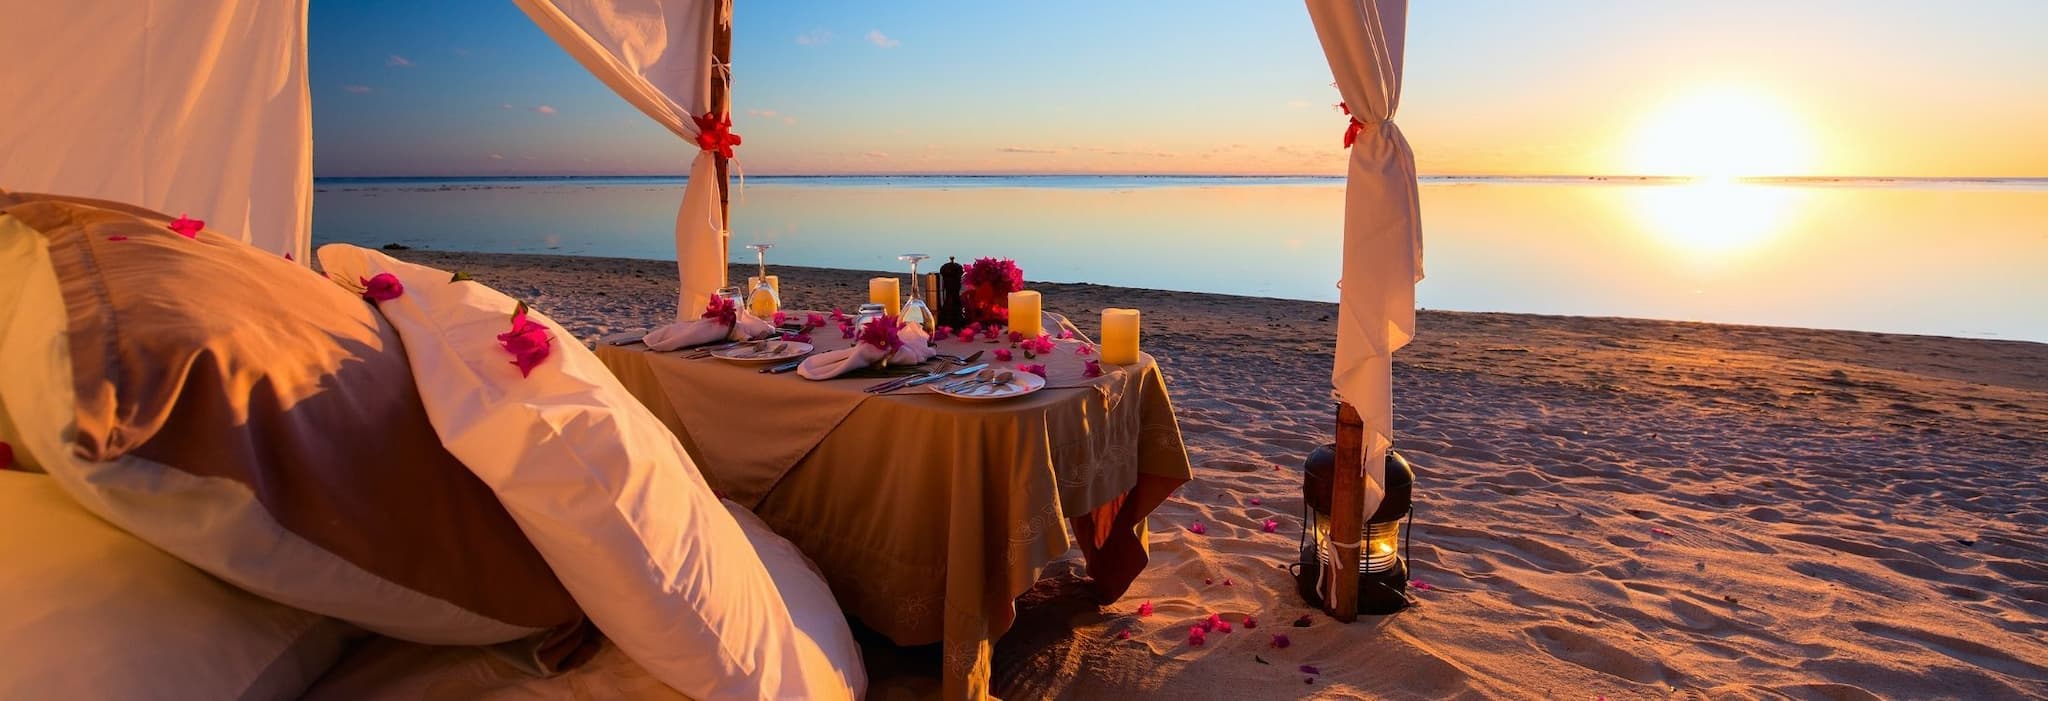 6 Romantic Restaurants In Mauritius For Your Date Night